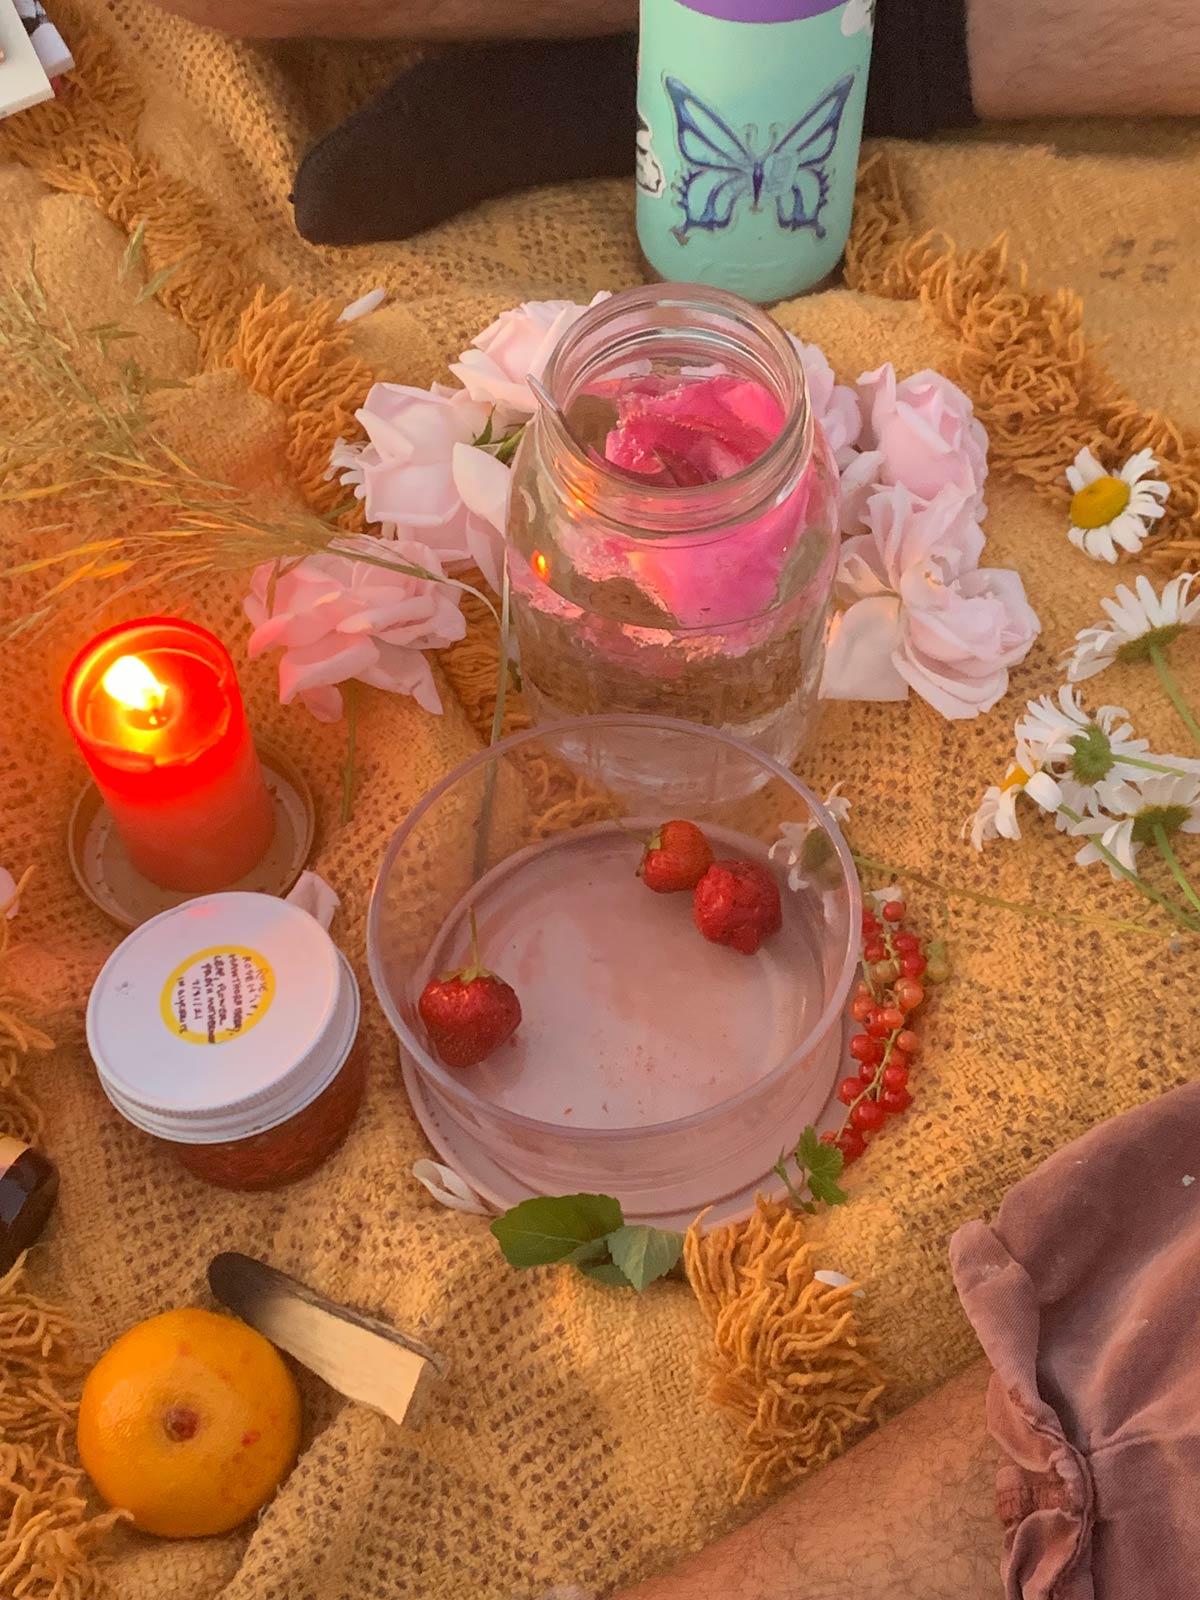 A photo of an altar with strawberries and a candle